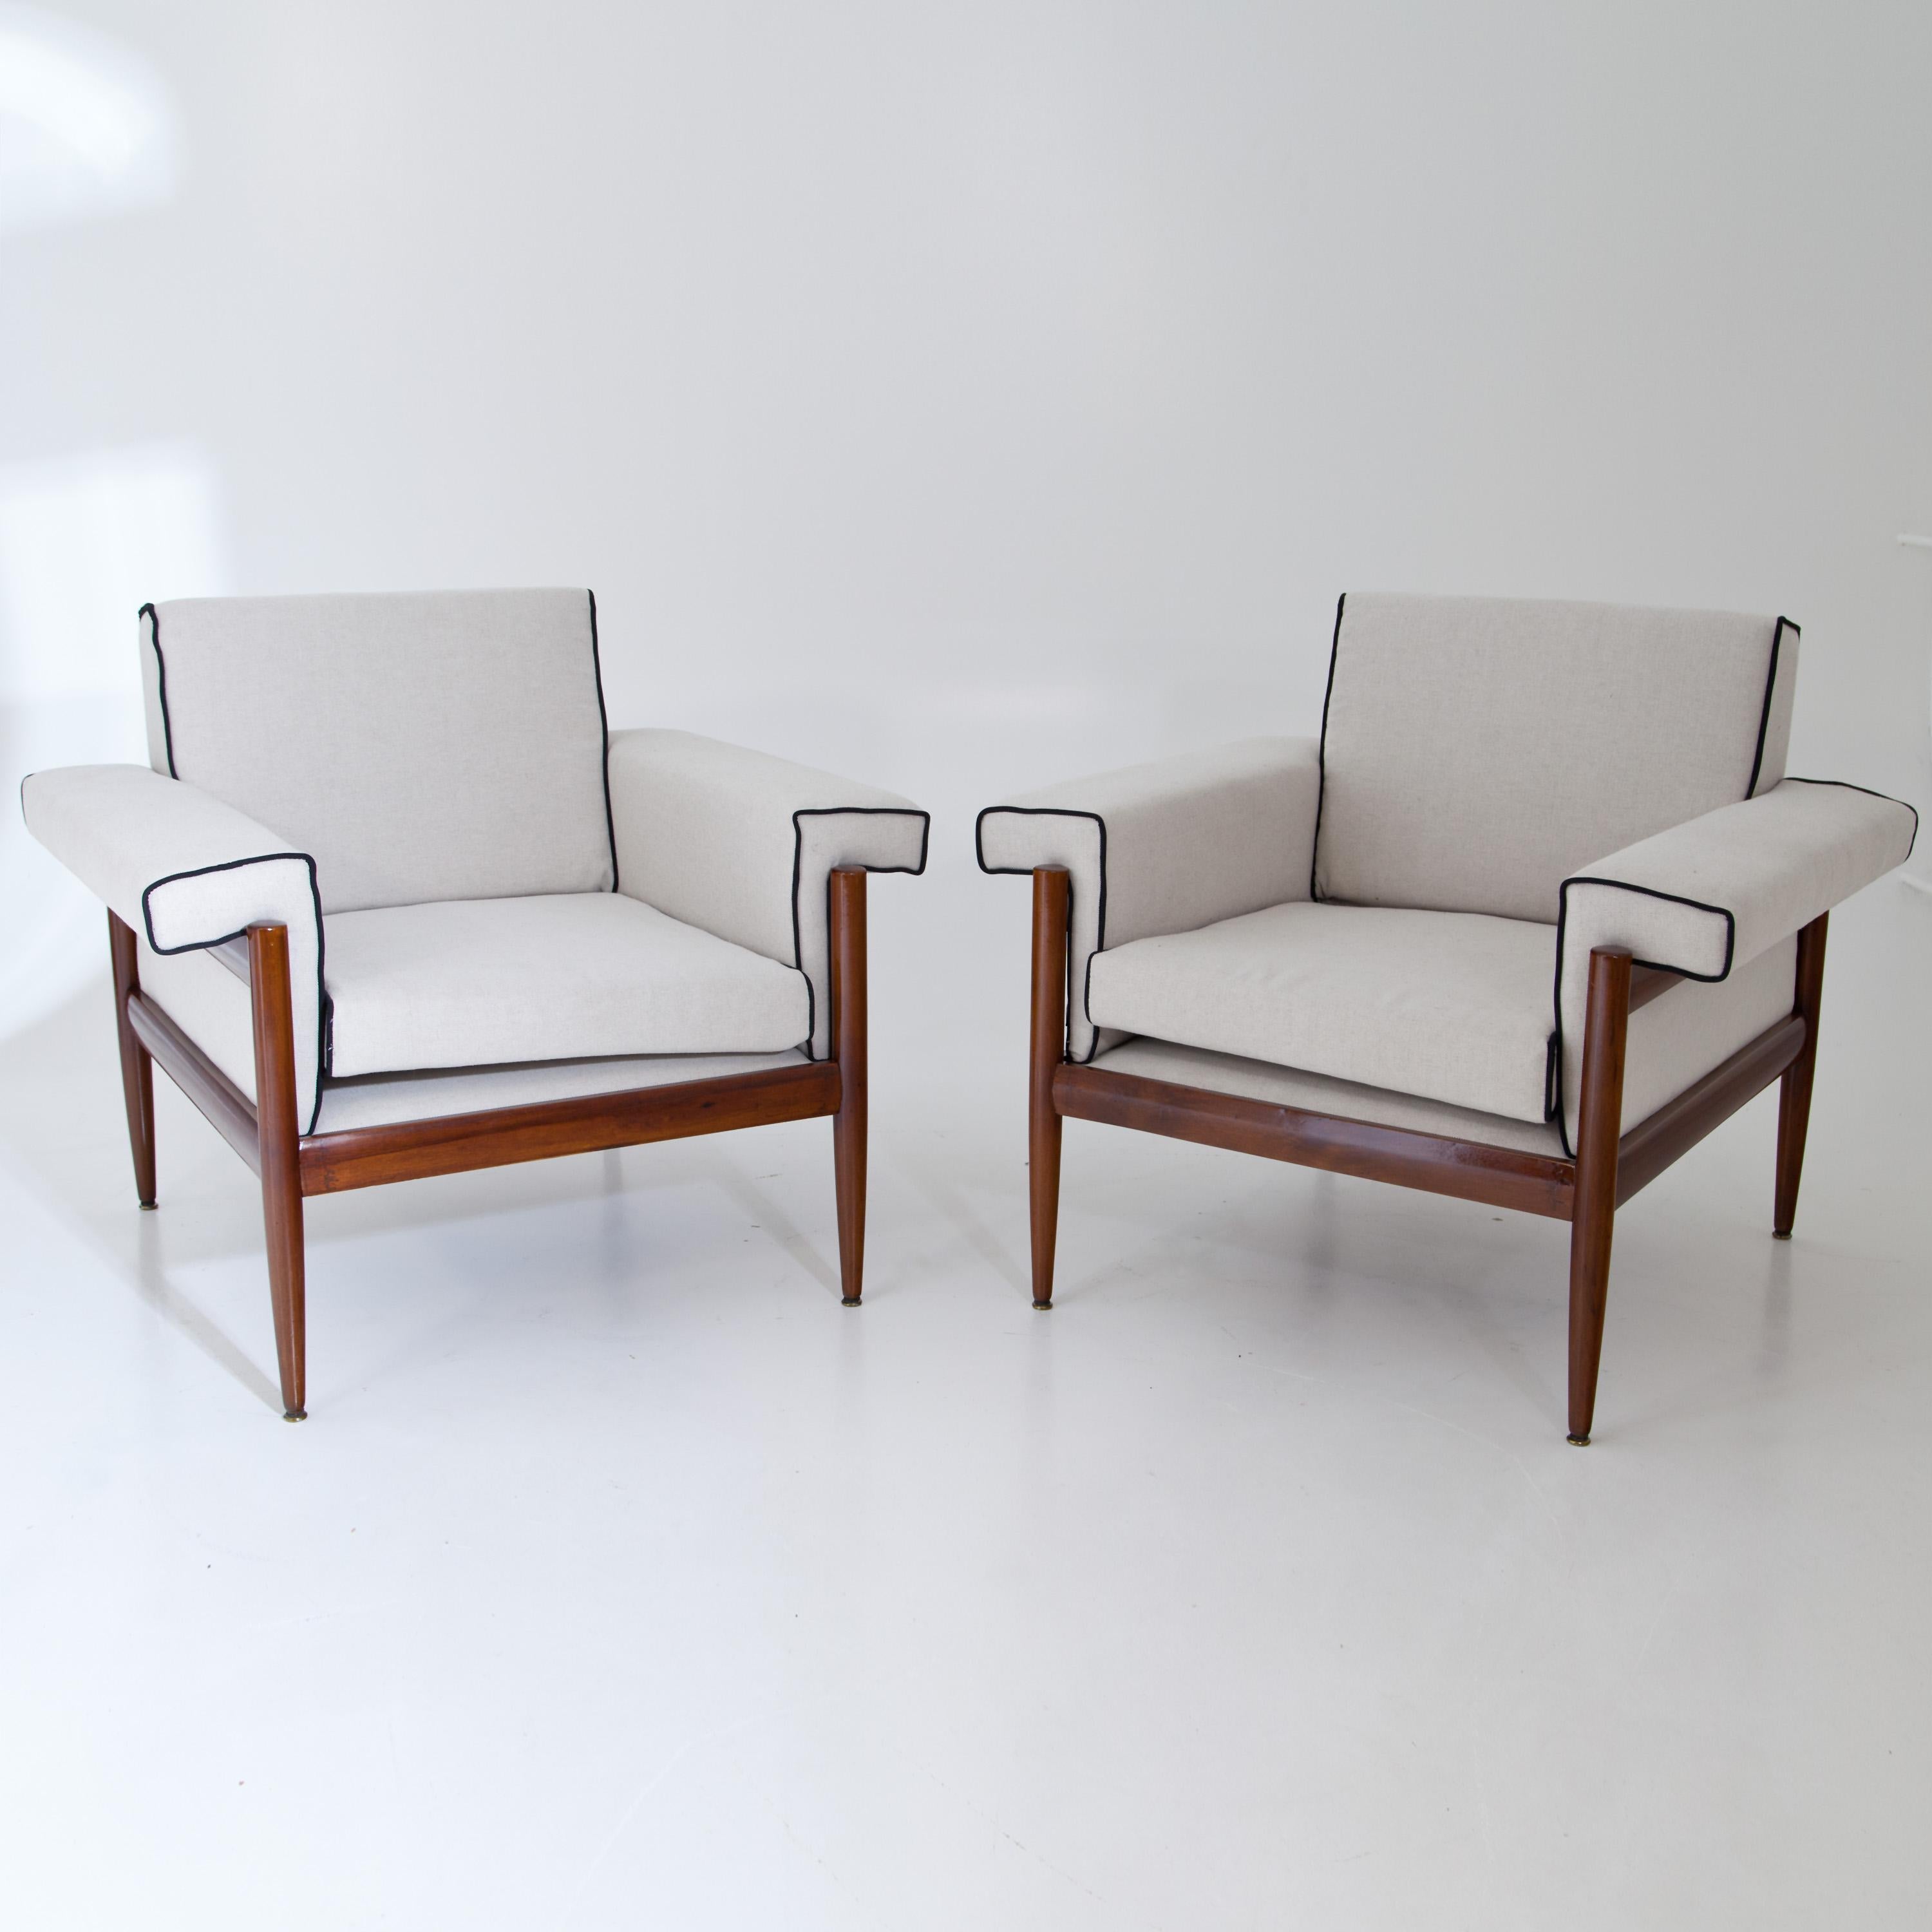 Pair of midcentury armchairs on conical legs and straight frames. The upholstery was newly covered with a white woven fabric with black piping.